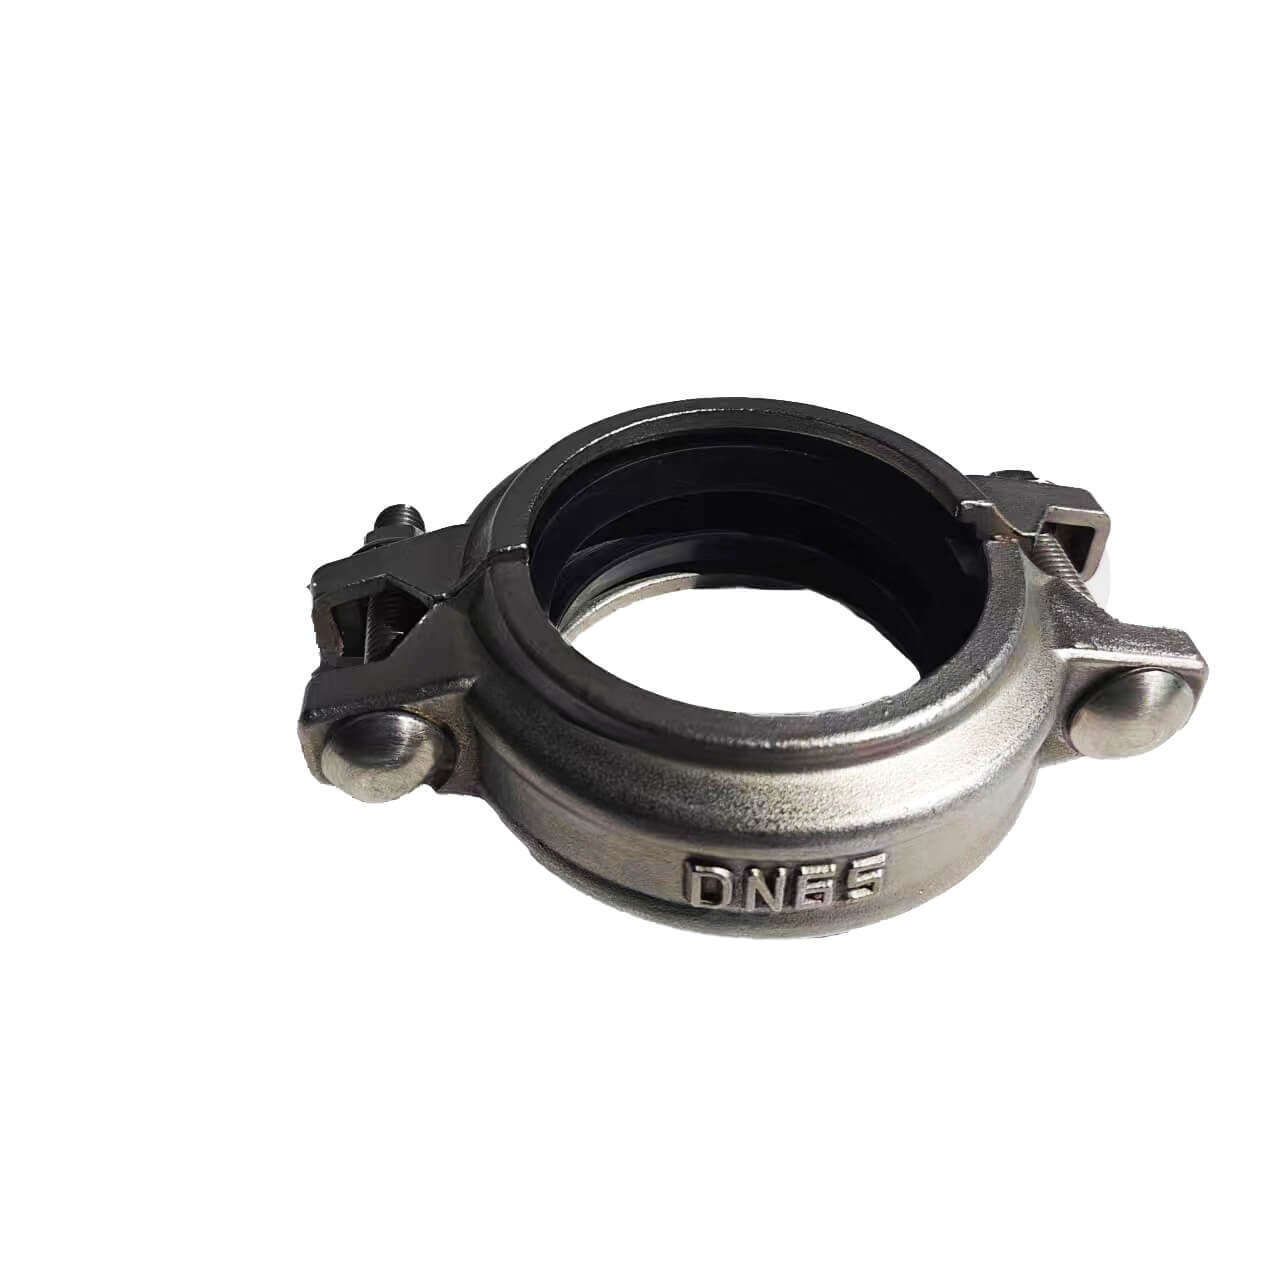 Tontr Pipe Fitting Stainless Steel 2.5 MPa Grooved Couplings Suppliers